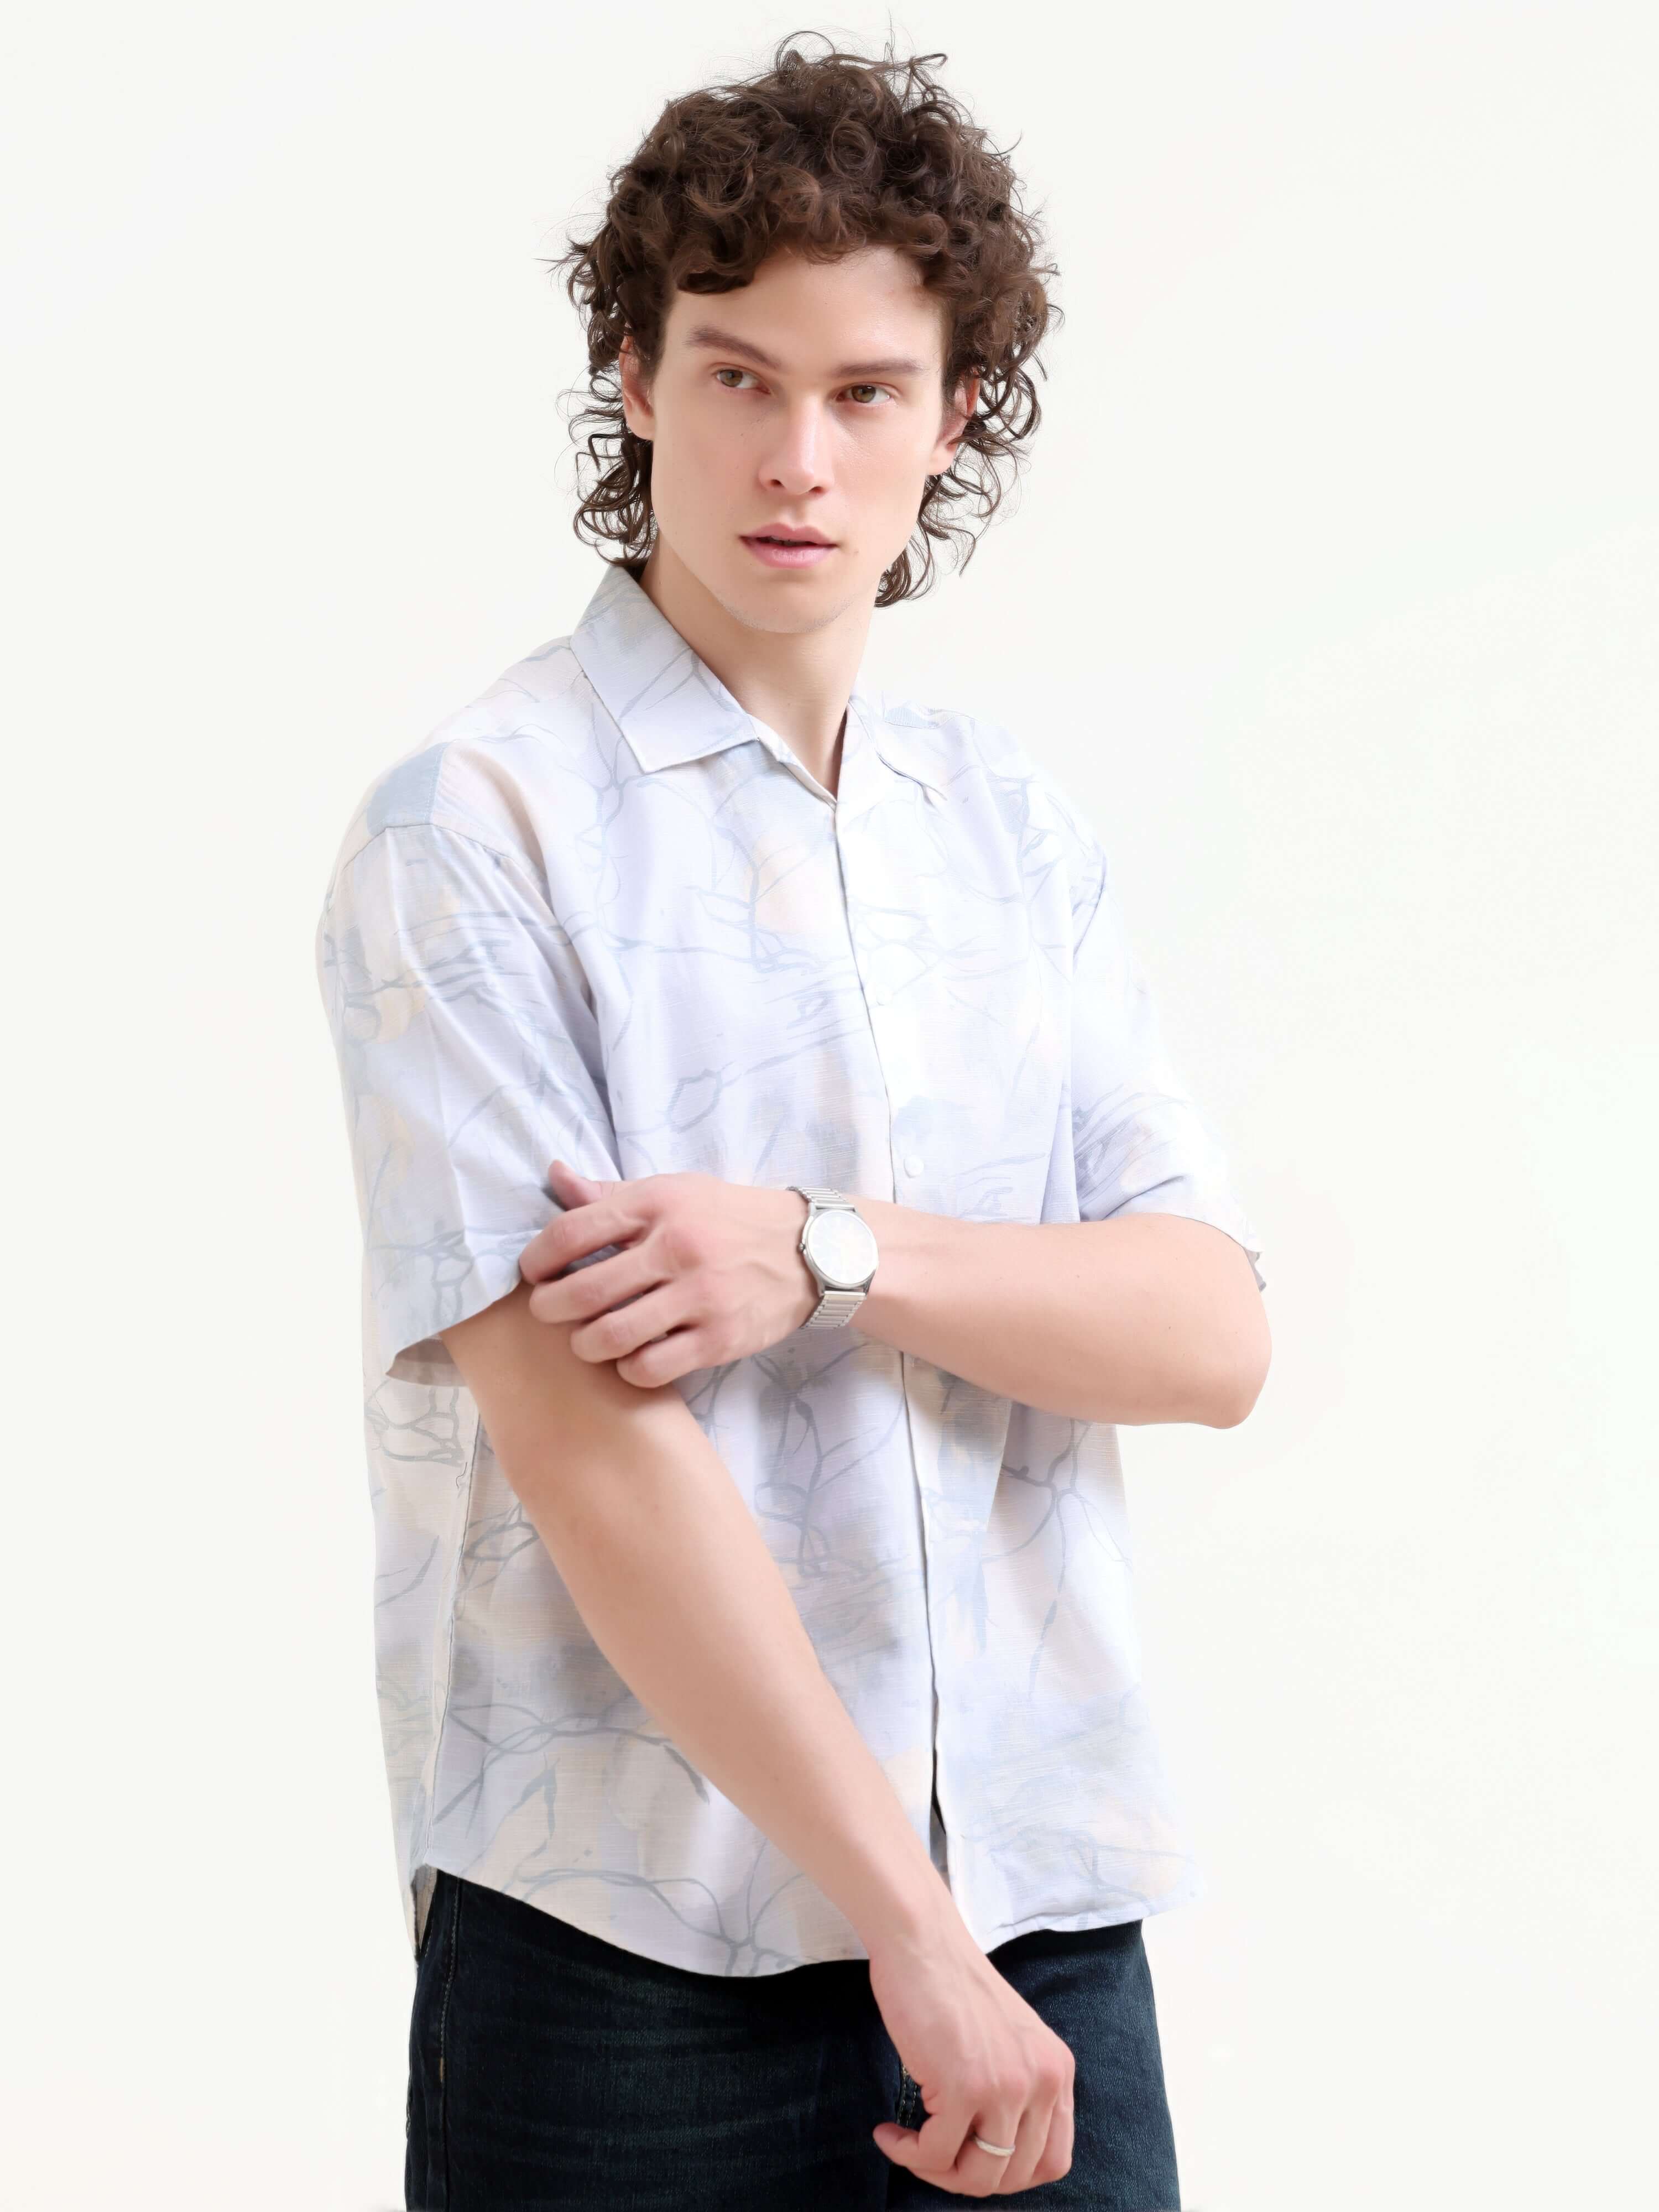 Mirajo Men's Dusky Blue Oversized Shirt shop online at Estilocus. Shop the new Mirajo oversized shirt for a breezy summer style. Light, airy, and perfect for casual days. Get your Hawaiian vibe on!